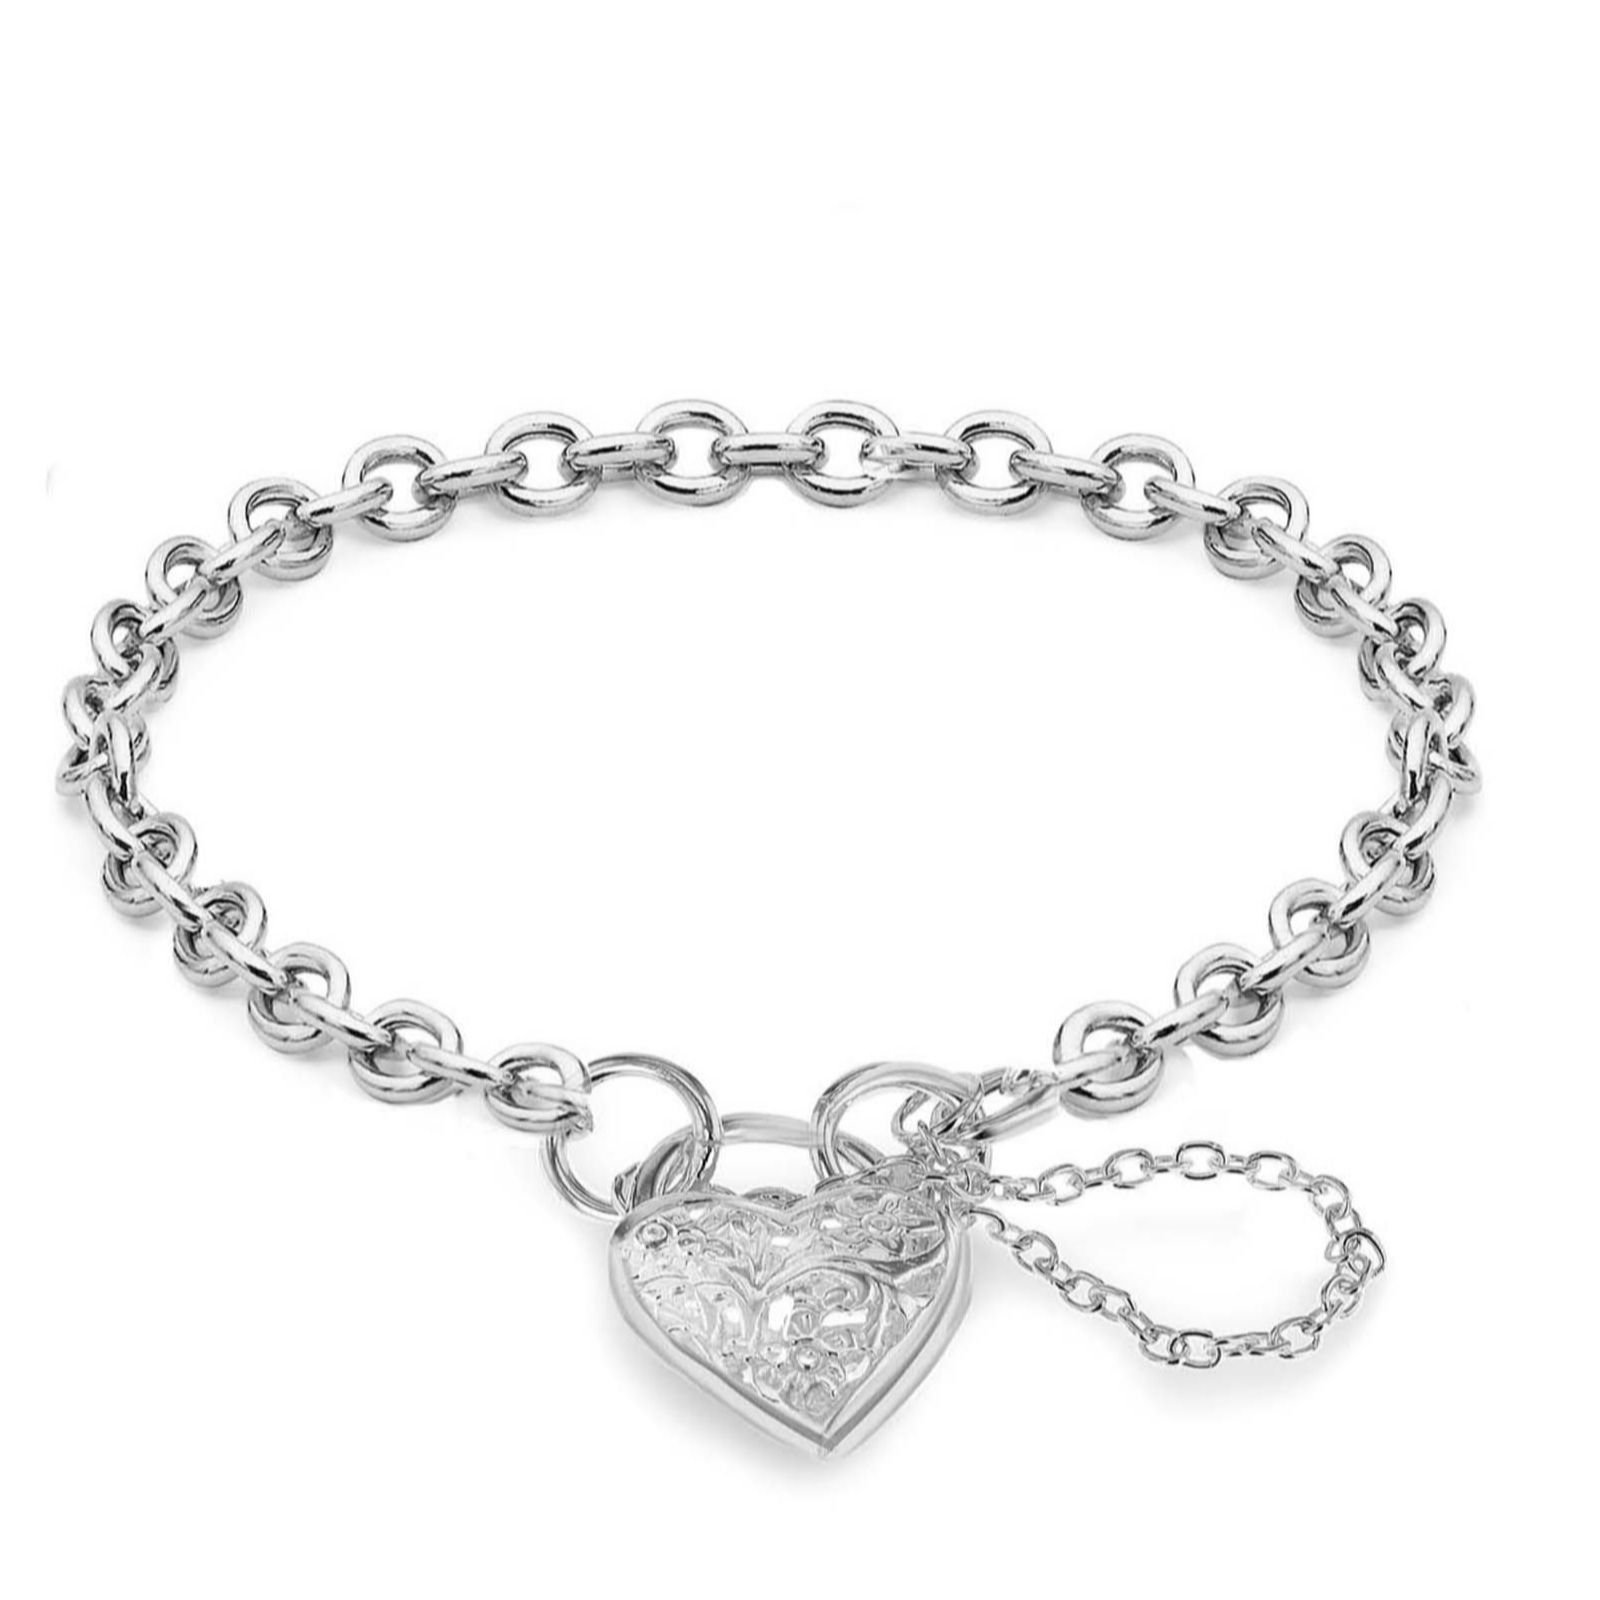 SILVER Heart Padlock with Safety Chain Bracelet 19cm - QVC UK